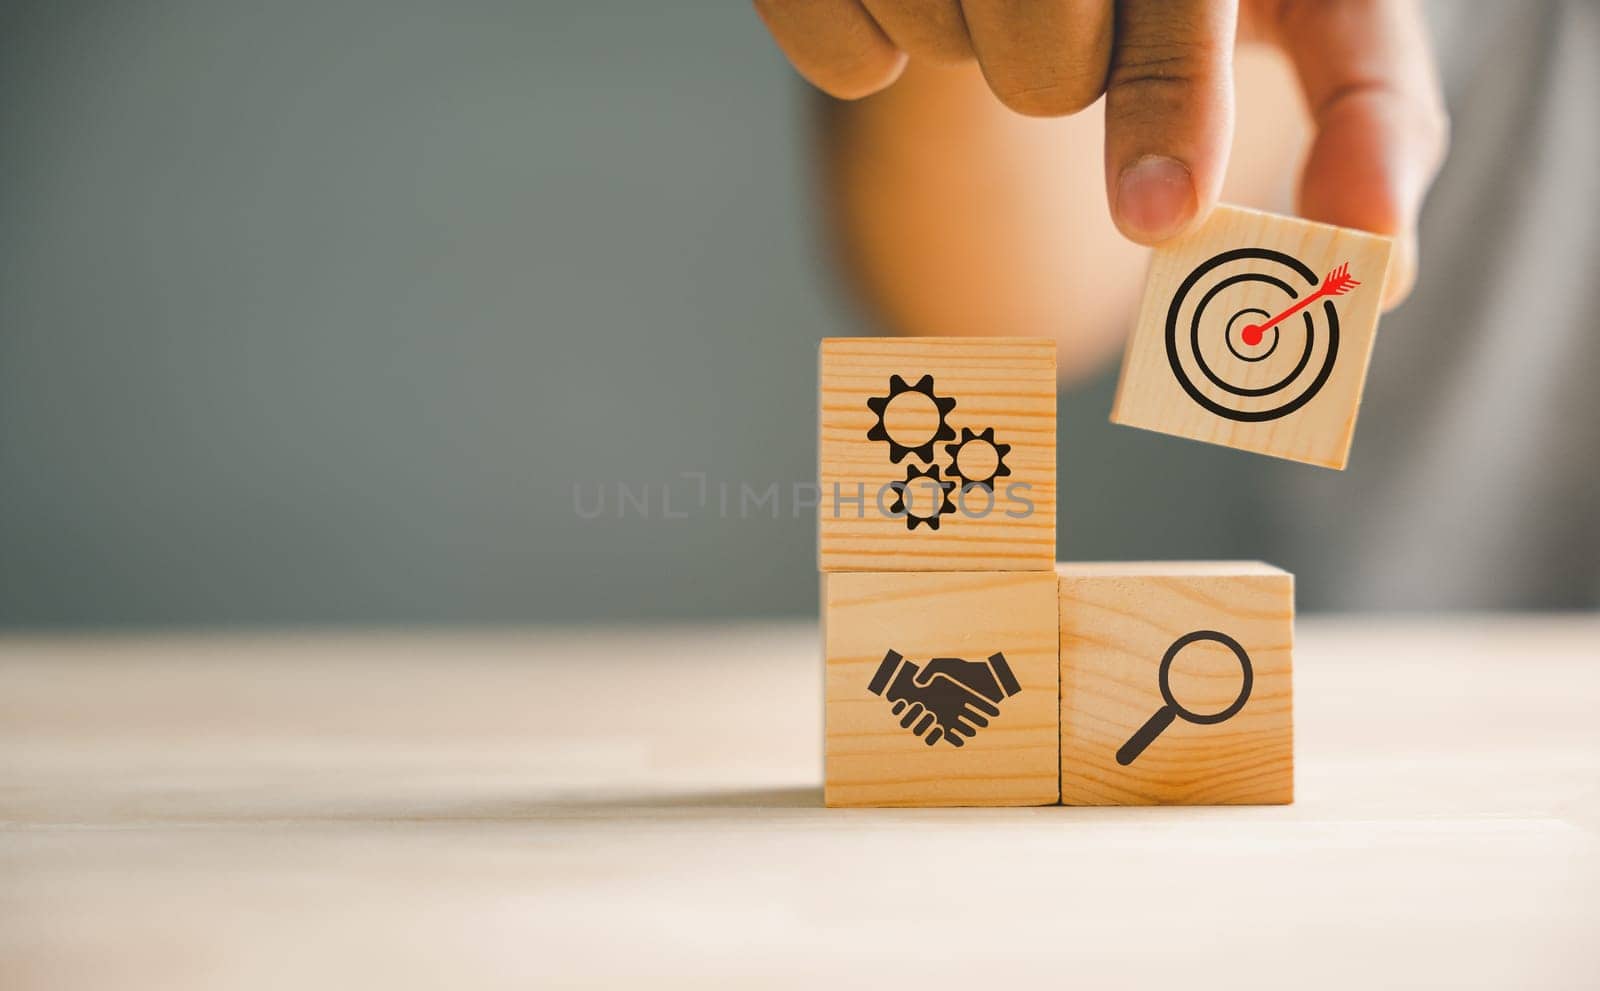 Hand skillfully arranging wood blocks in a strategic stacking, symbolizing business strategy and Action plan. Targeting the concept of business development and growth.